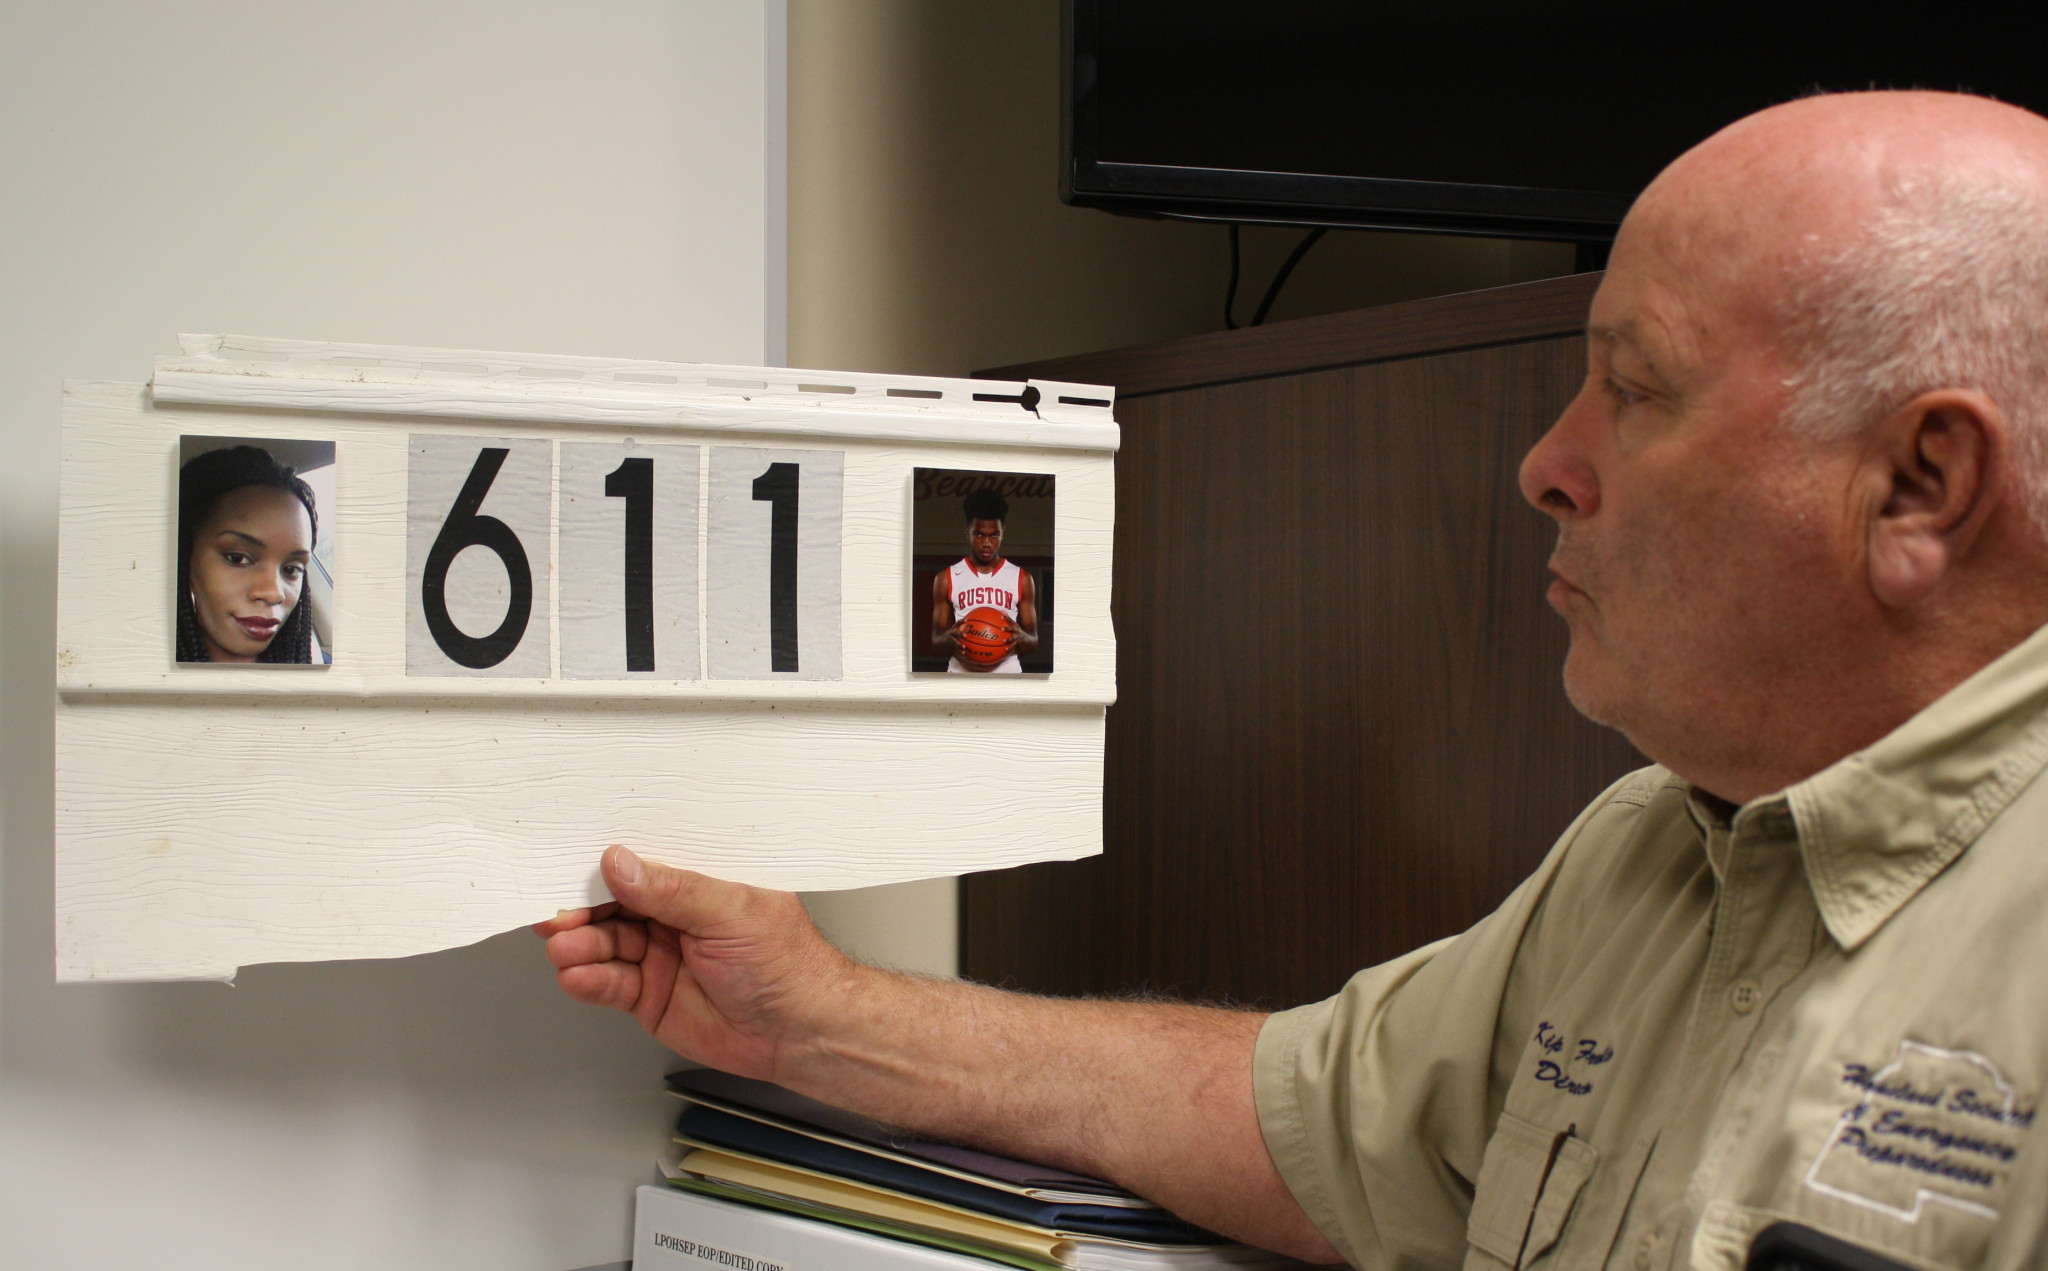 <span style="font-size:12pt"><span style="font-family:&quot;Times New Roman&quot;">Lincoln Parish Director of Homeland Security and Emergency Preparedness Kip Franklin holds a piece of siding from the Evans Street house where Kendra and Remington Butler lost their lives during the tornado. It hangs in Franklin’s office with pictures of the Butlers affixed to it.</span></span>